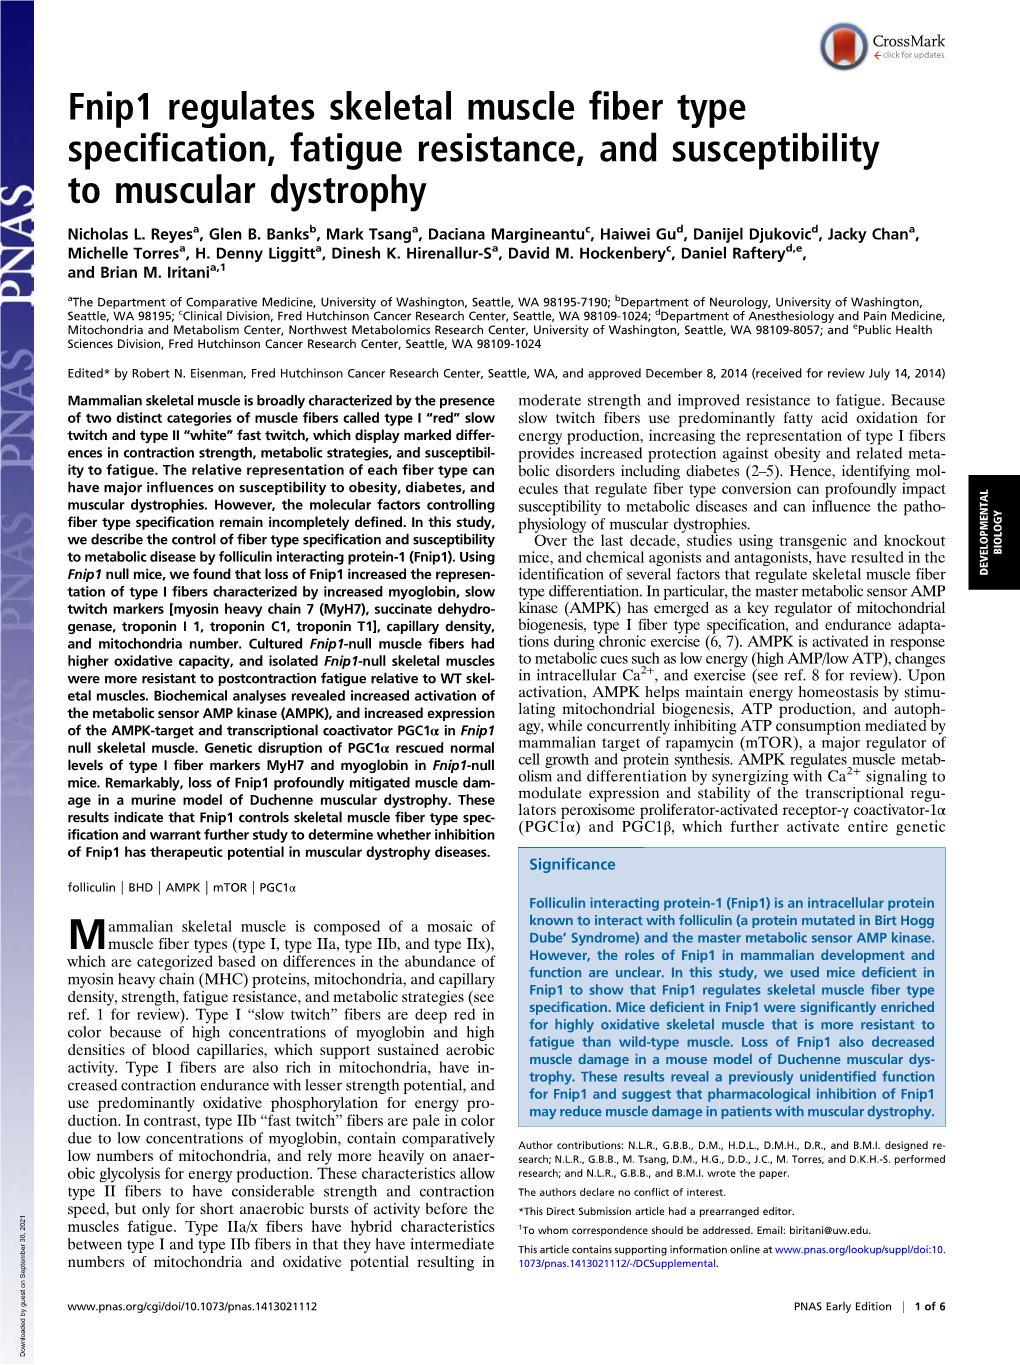 Fnip1 Regulates Skeletal Muscle Fiber Type Specification, Fatigue Resistance, and Susceptibility to Muscular Dystrophy